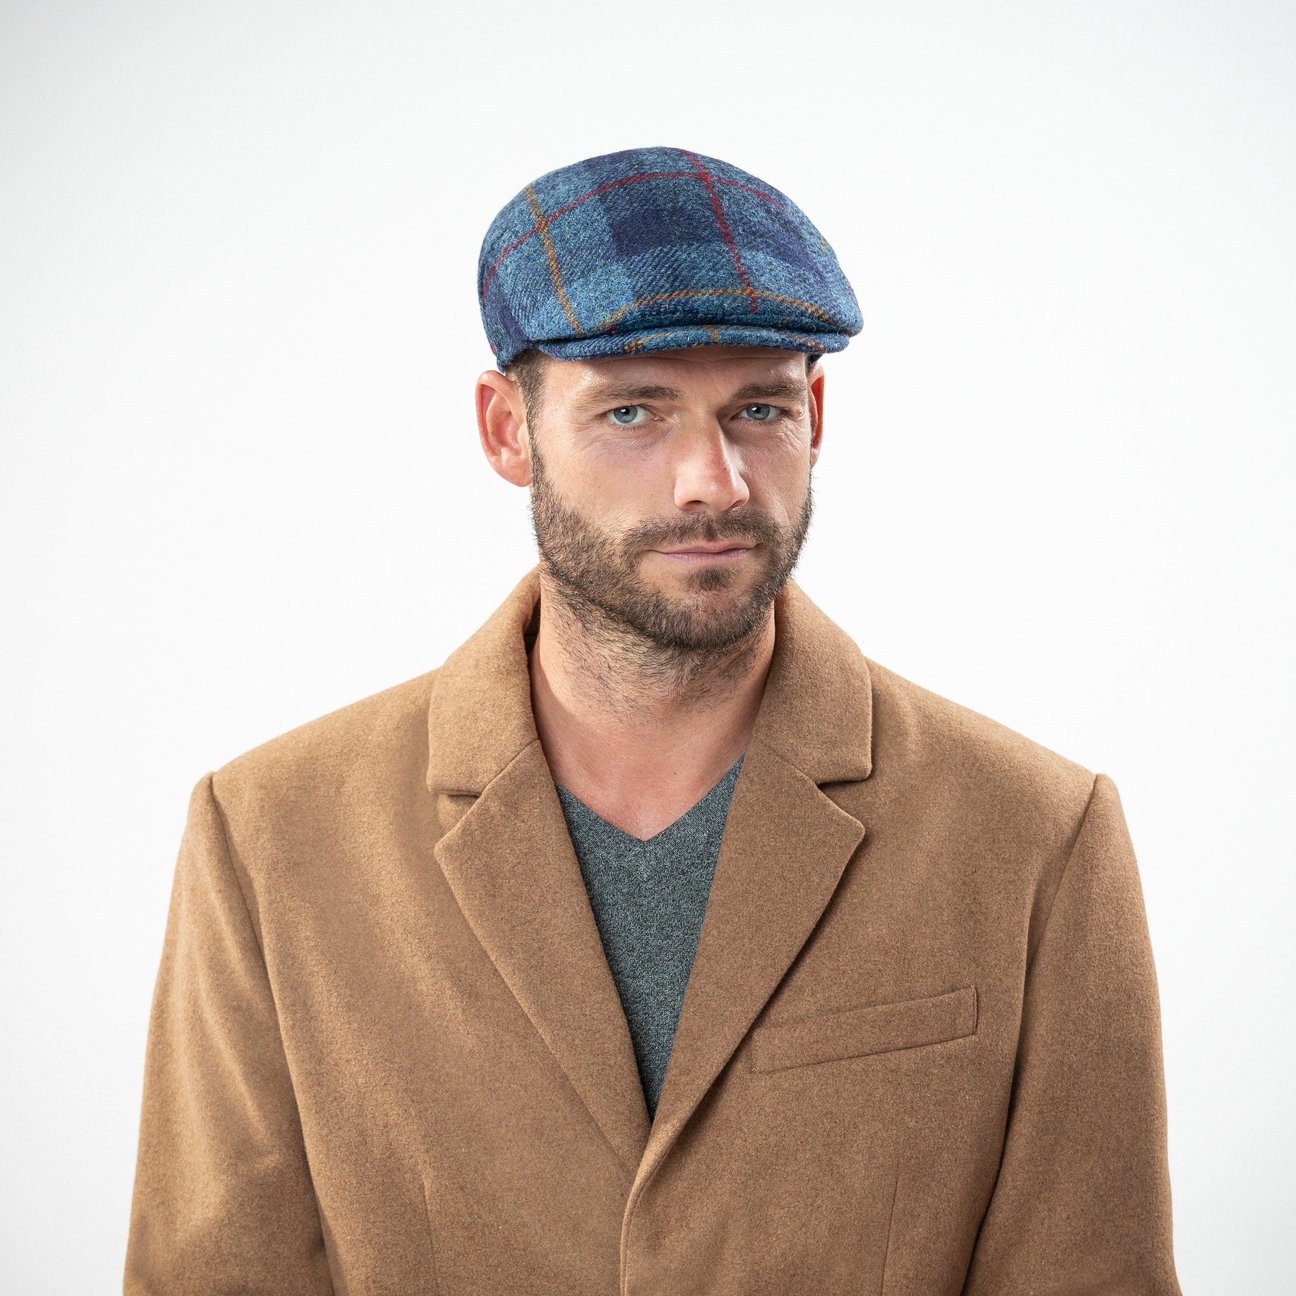 Lipodo Flat Cap Chequered Patterns Men Peaked Cap Autumn/Winter Made in Italy -Lined Cap Made with Wool Mens Cap with Visor 